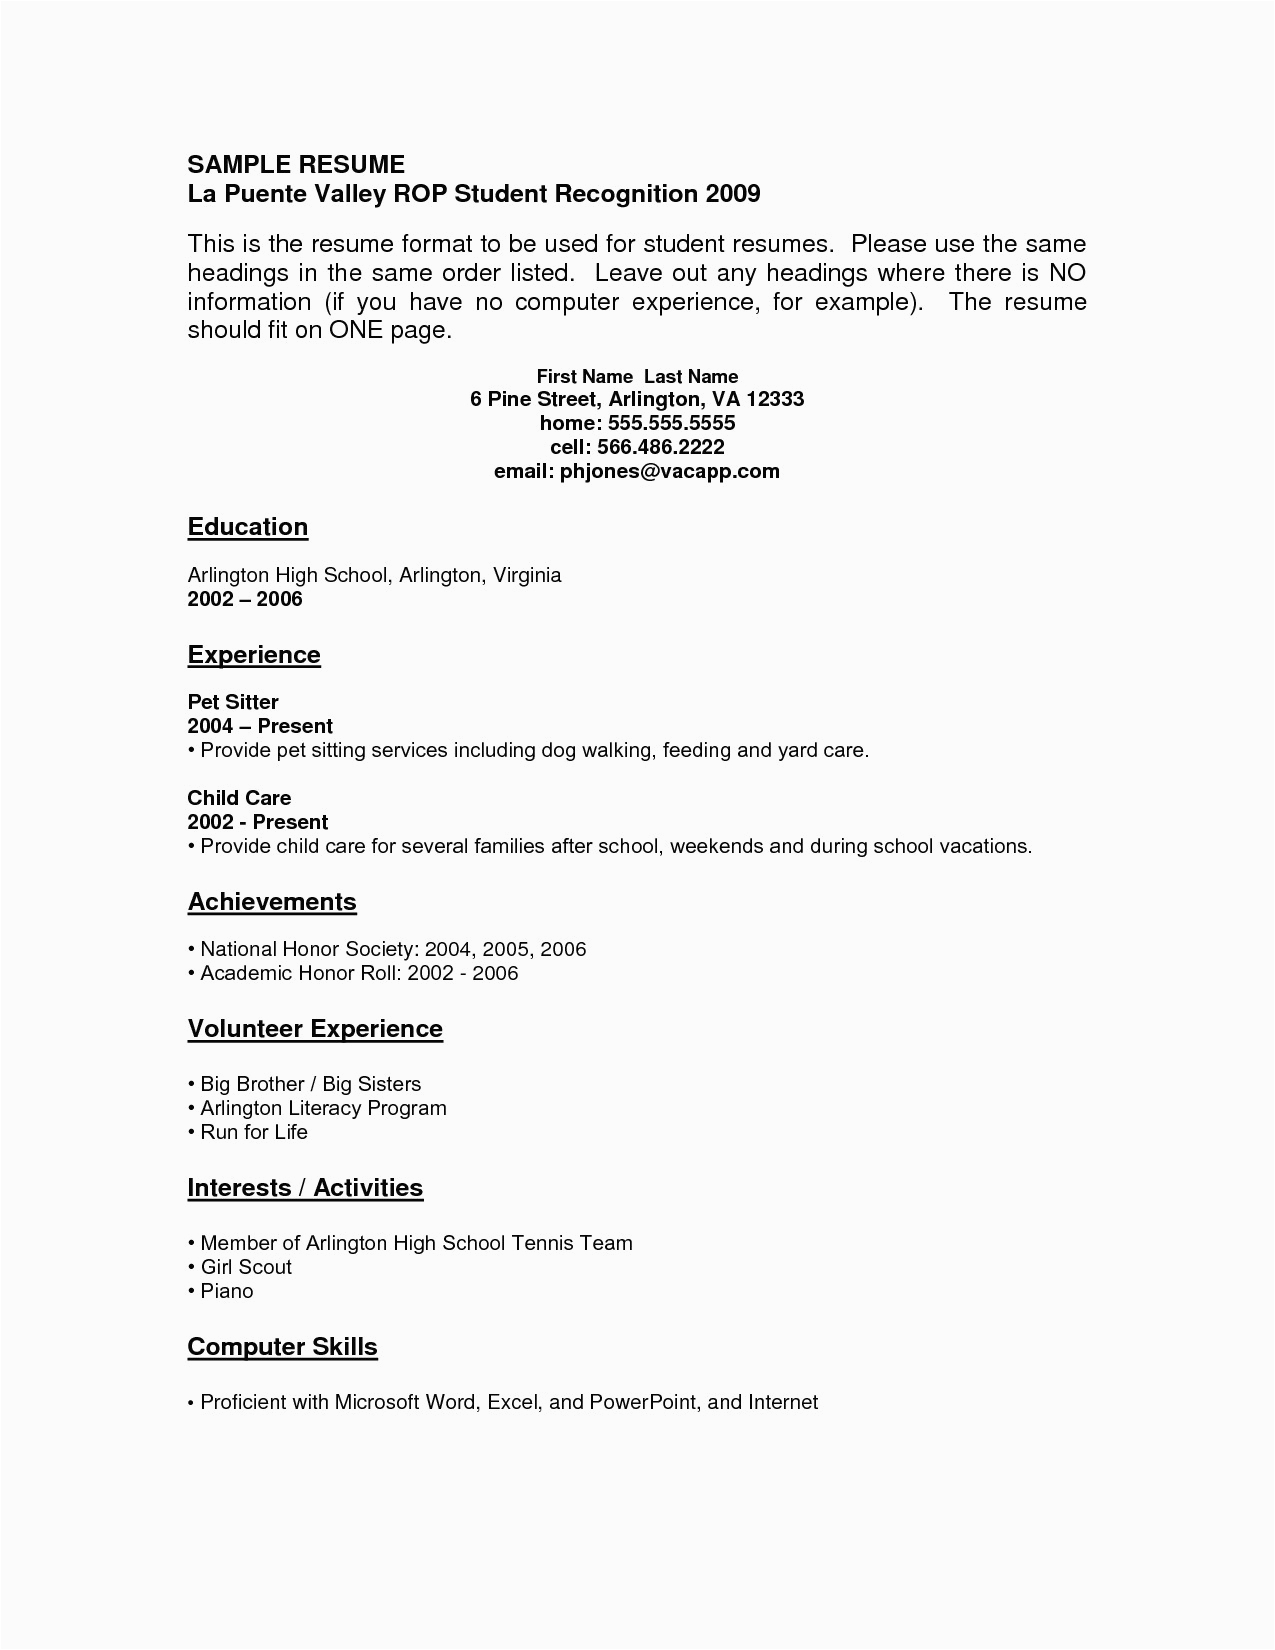 Sample Of Functional Resume with No Experience Free Resume Templates for High School Students with No Experience